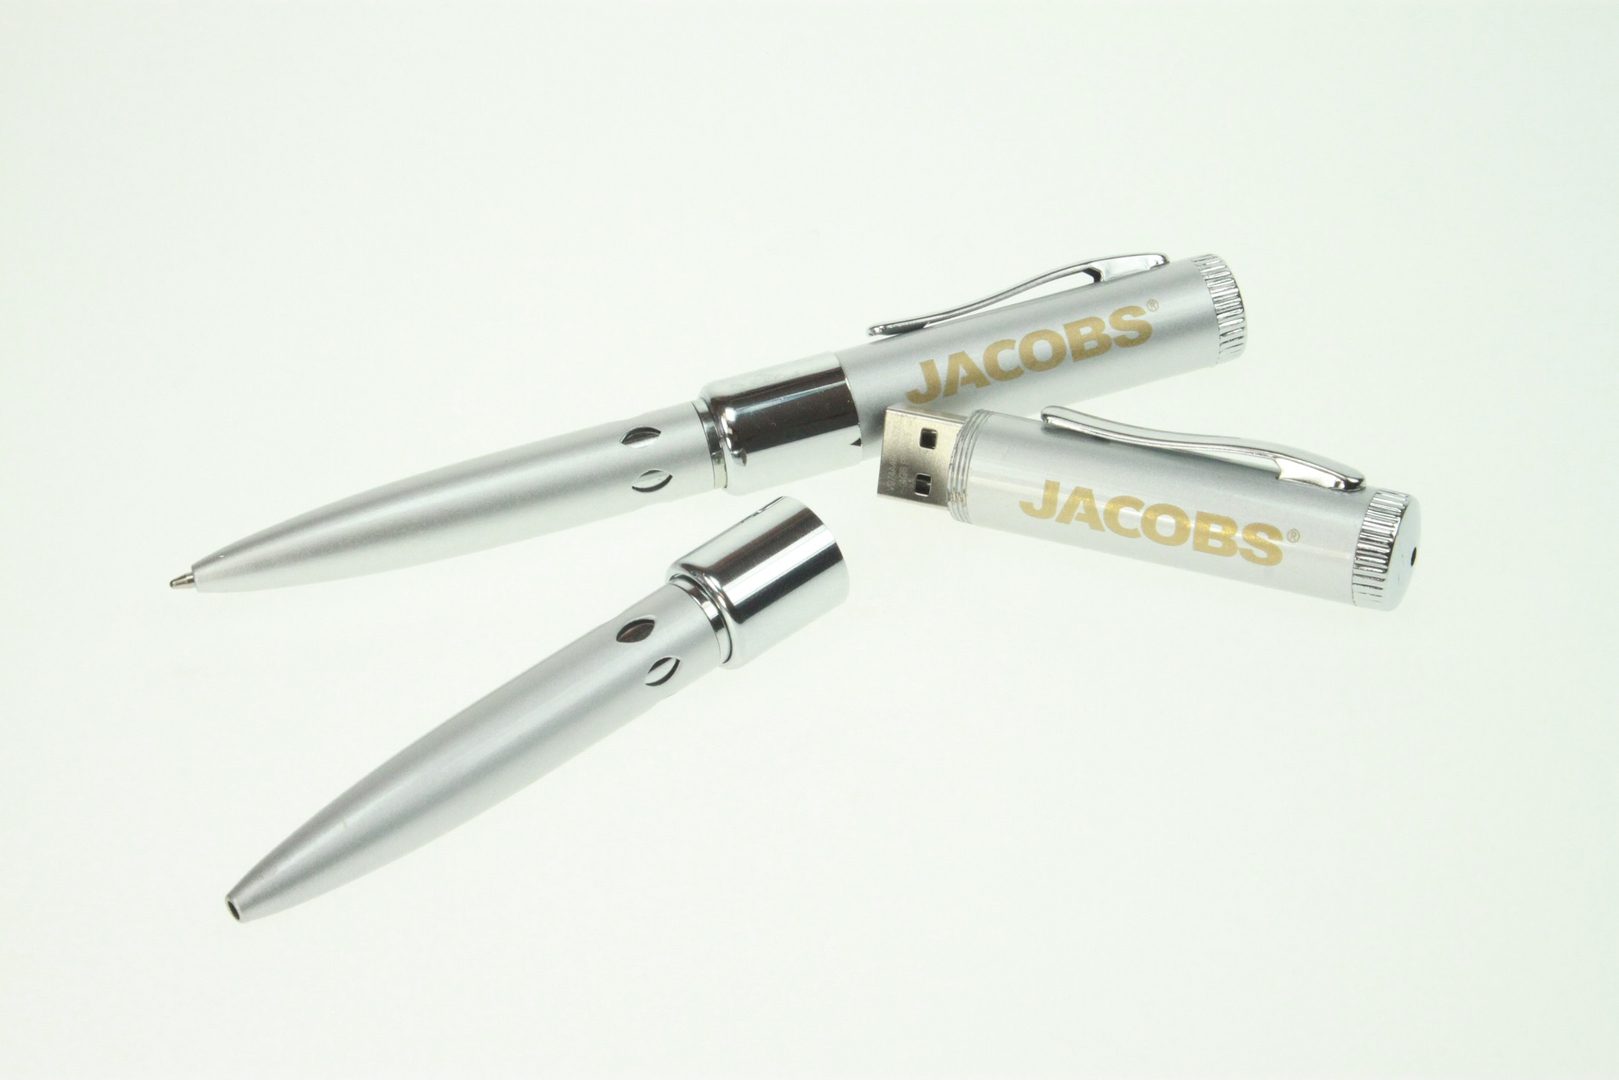 Two Jacobs pens with USB drive on plain with background